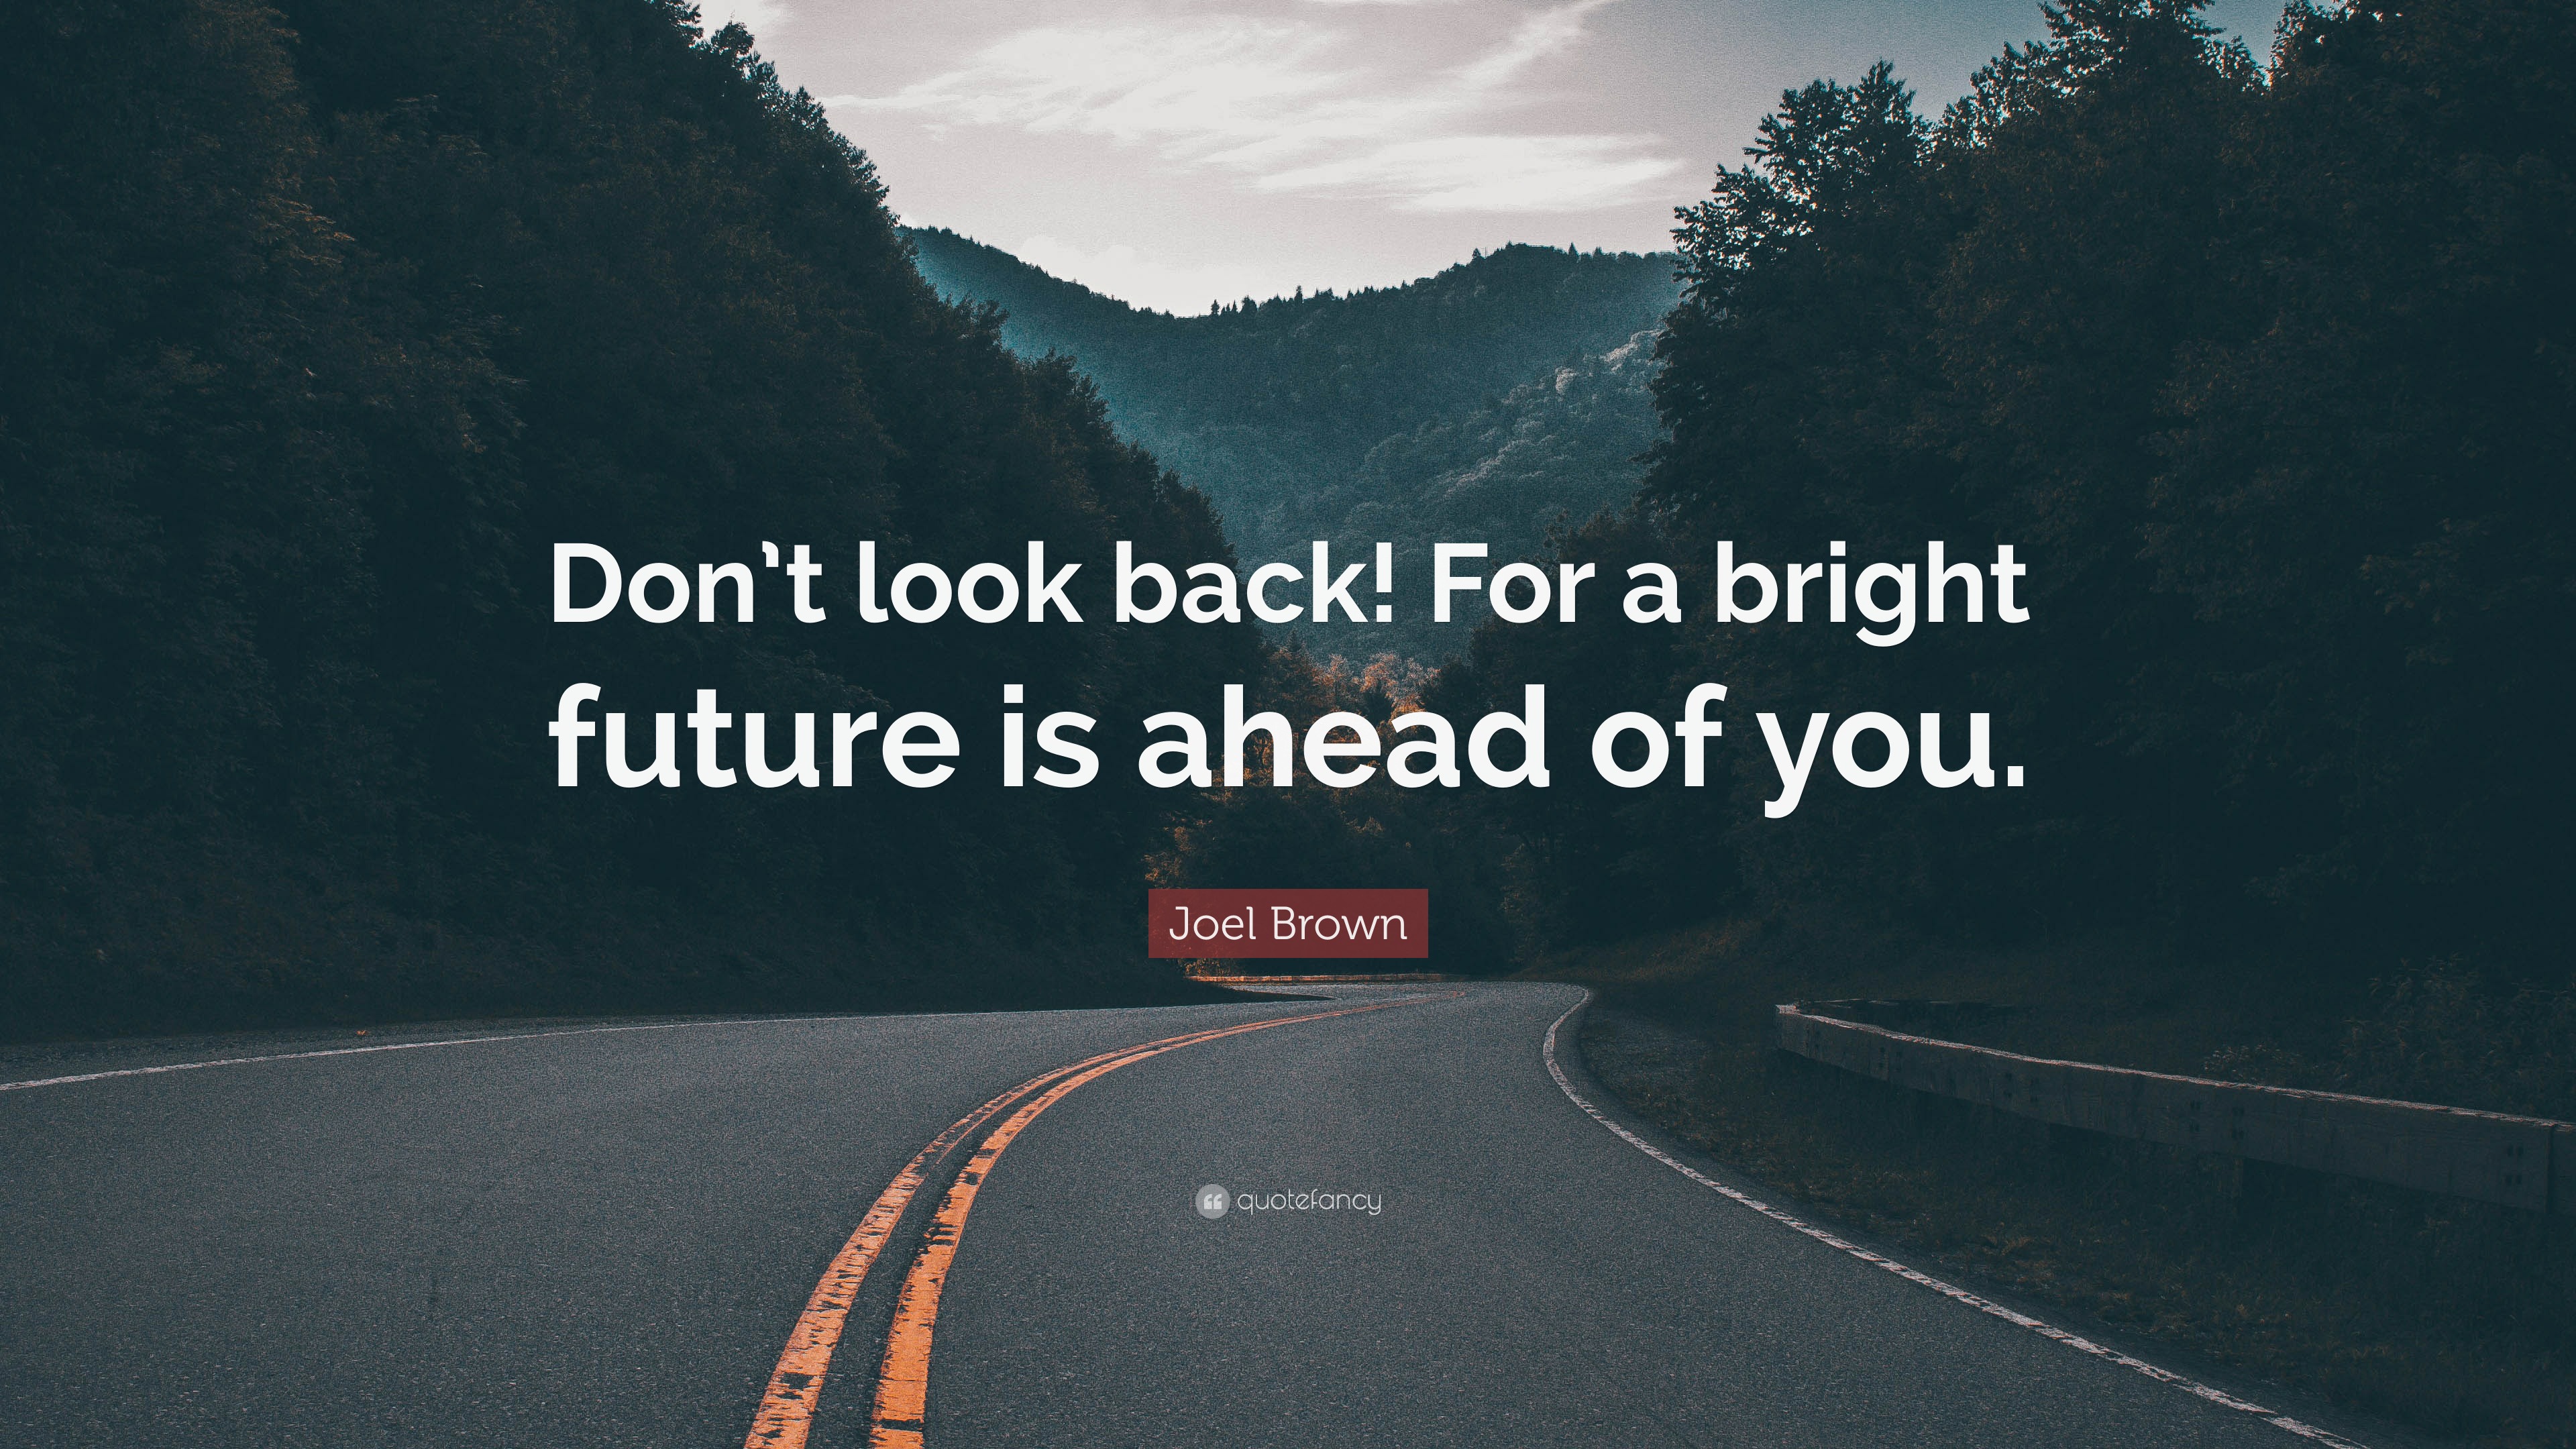 Quotes On The Future Is Bright - Ilka Randie